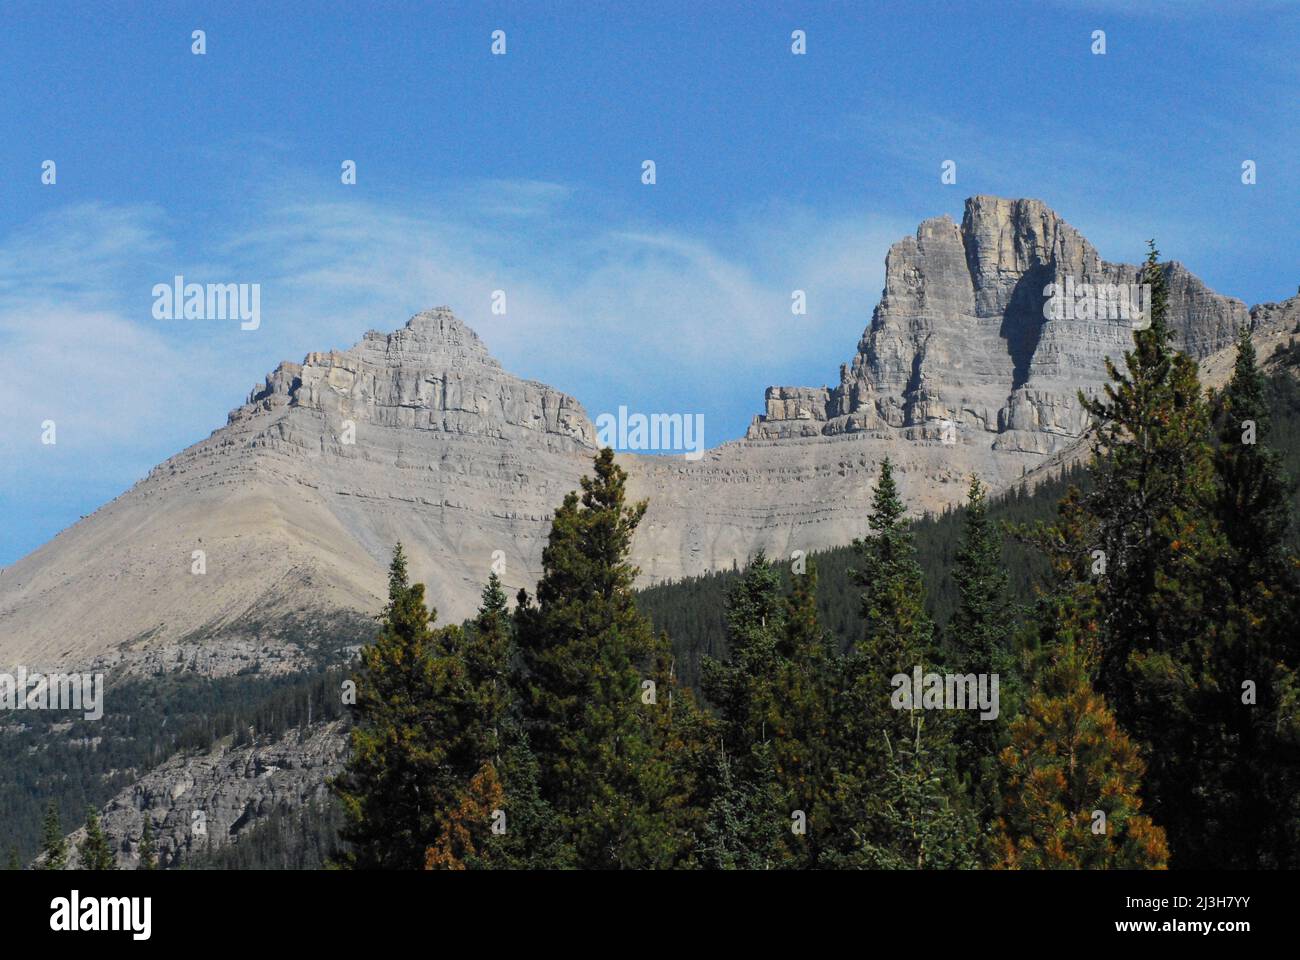 Panoramic landscape of stone mountain peaks and Conifer forest in the Rocky Mountain range of Alberta, Canada. Stock Photo